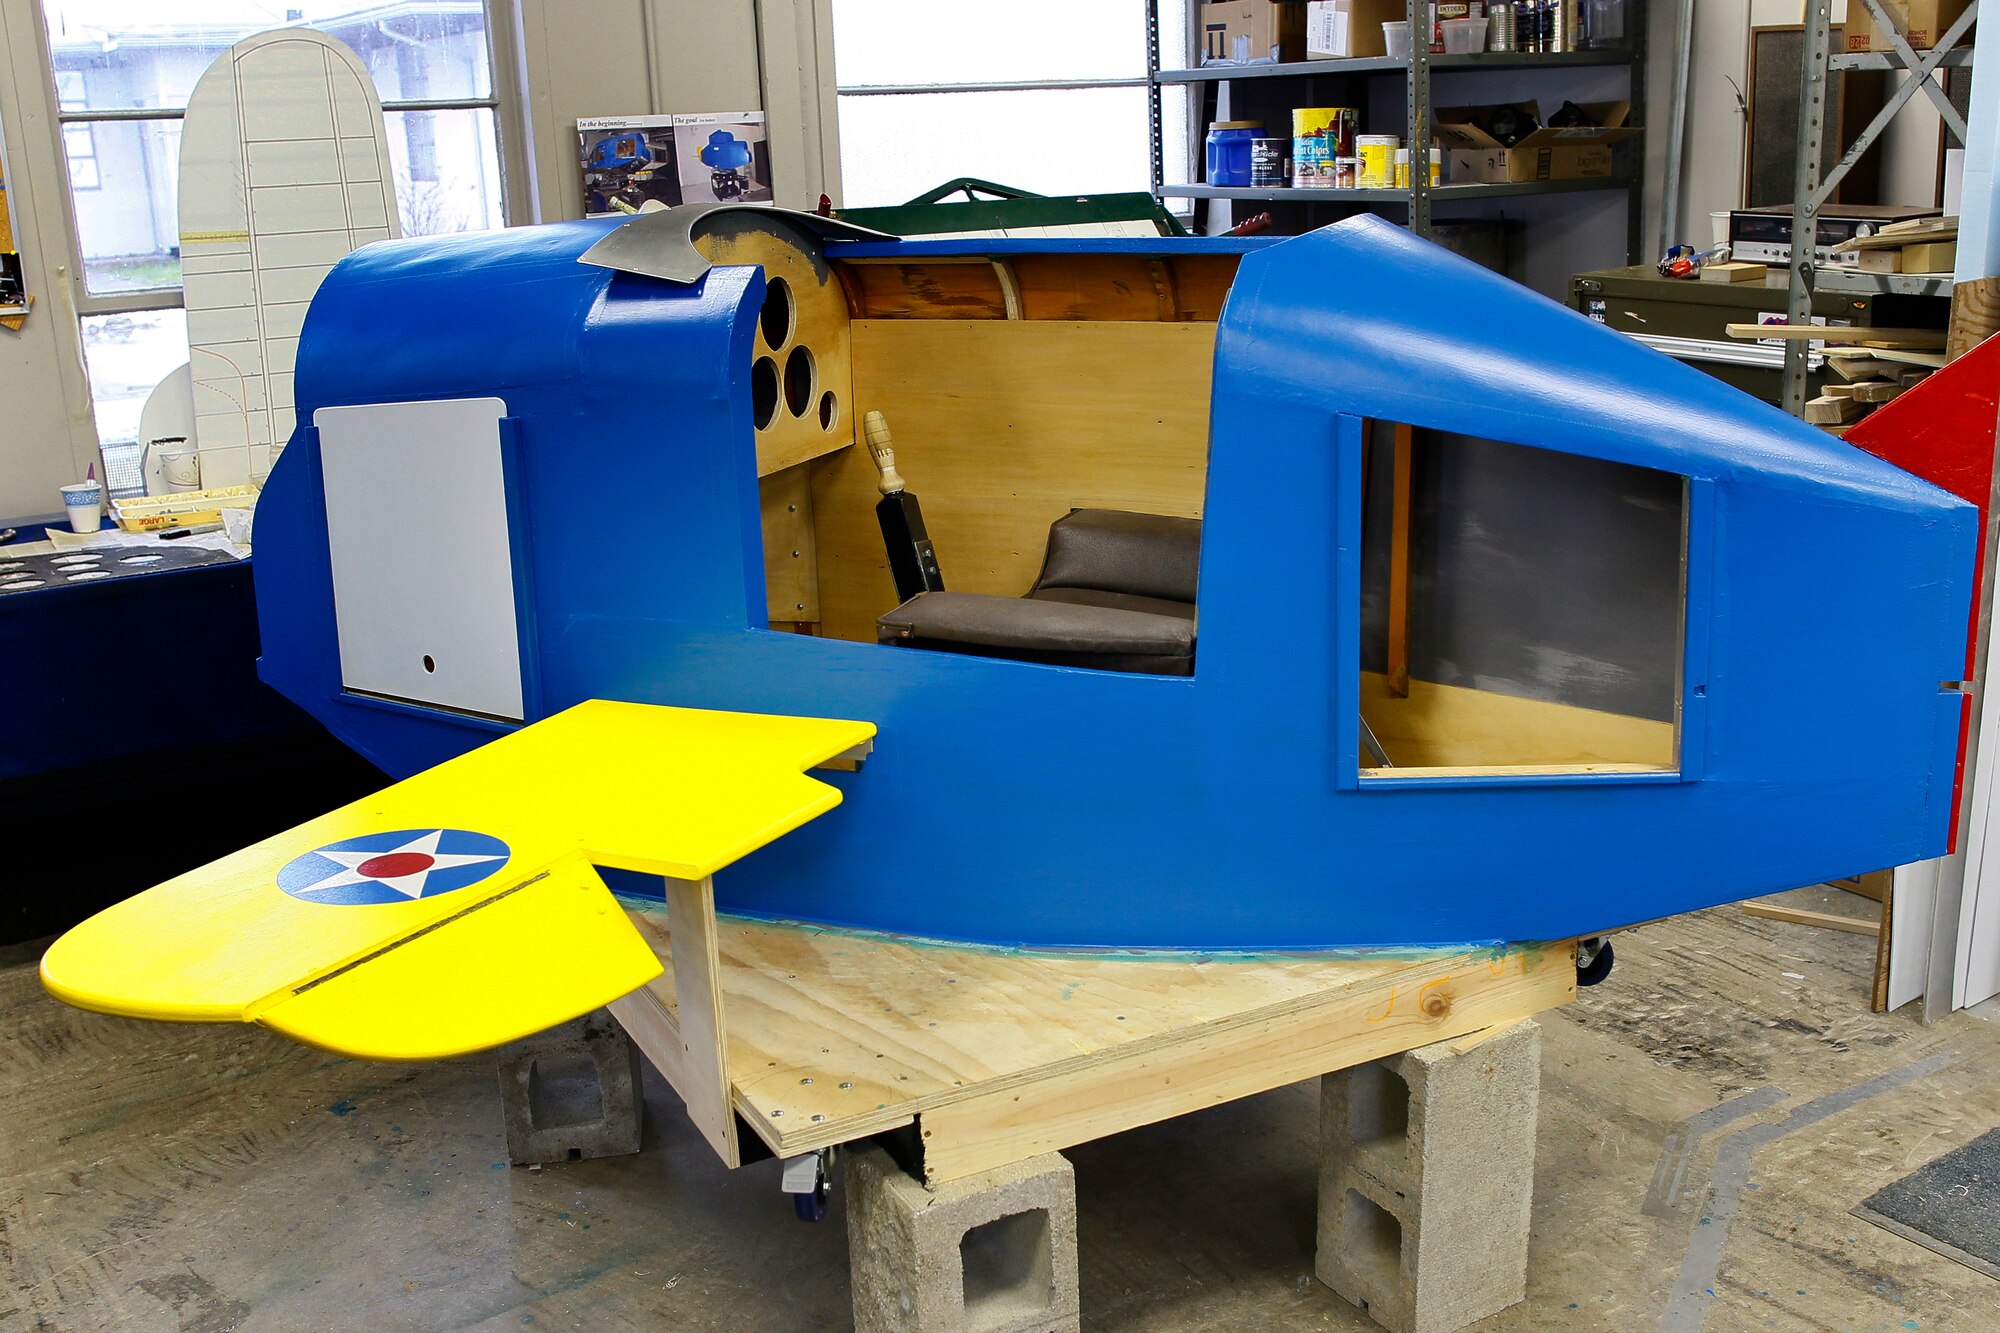 A replica of a World War II-era Link Trainer is being prepared for display at the Selfridge Military Air Museum, March 10, 2011. Children will be able to sit in the trainer and work the controls. An authentic Link Trainer is currently being restored by museum volunteers for future display. (U.S. Air Force photo by MSgt. Terry Atwell)(RELEASED)